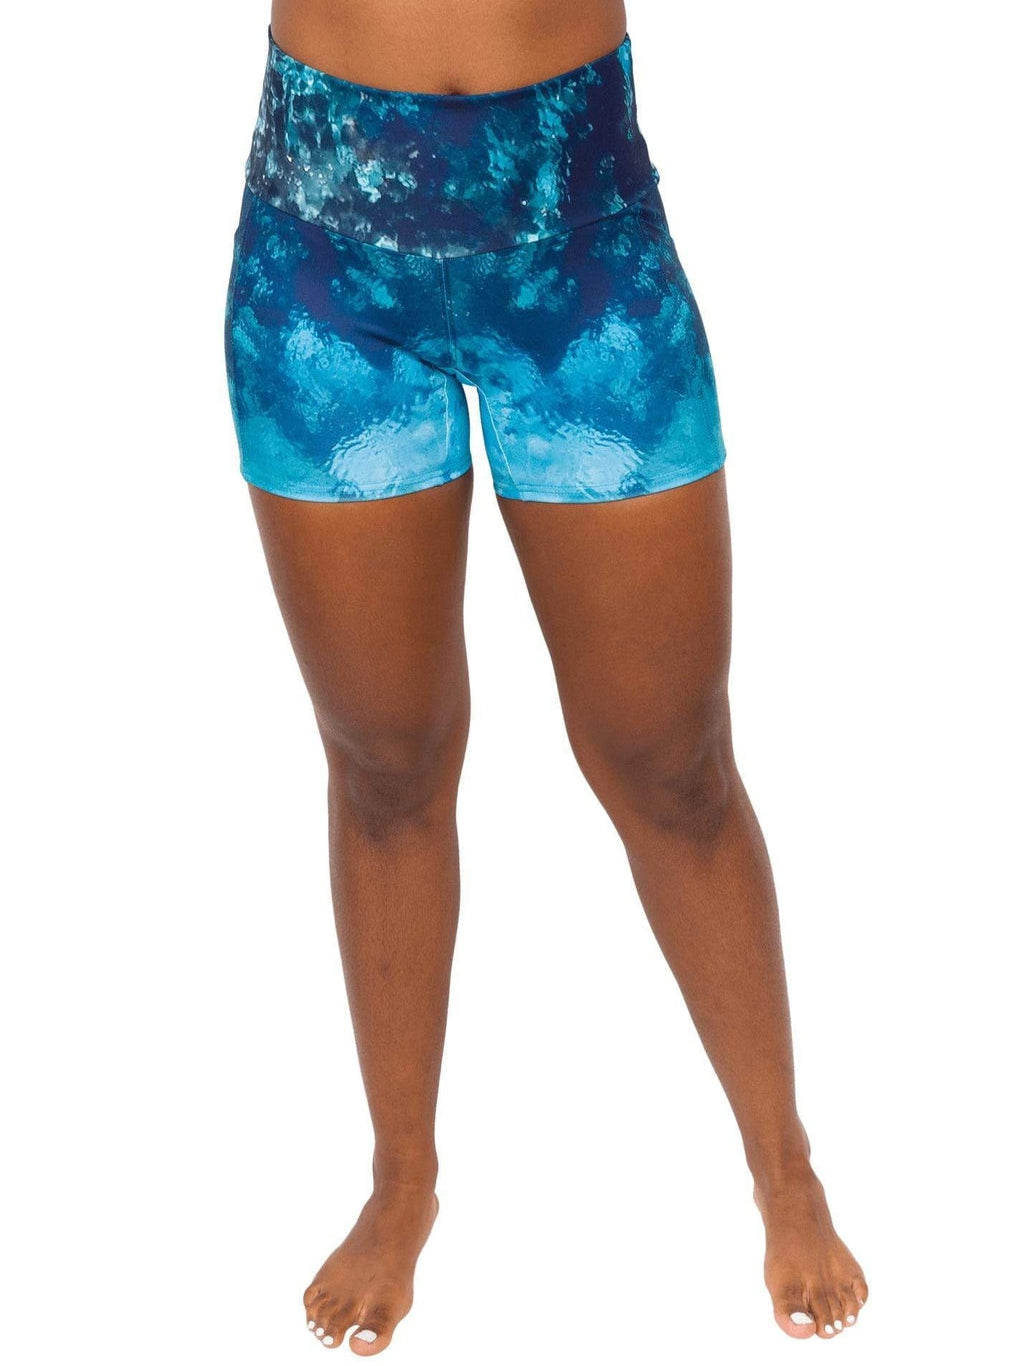 Model: Carlee is a shark & sea turtle scientist and co-founder of Minorities in Shark Sciences. She is 5'7", 145 lbs and is wearing a M short.